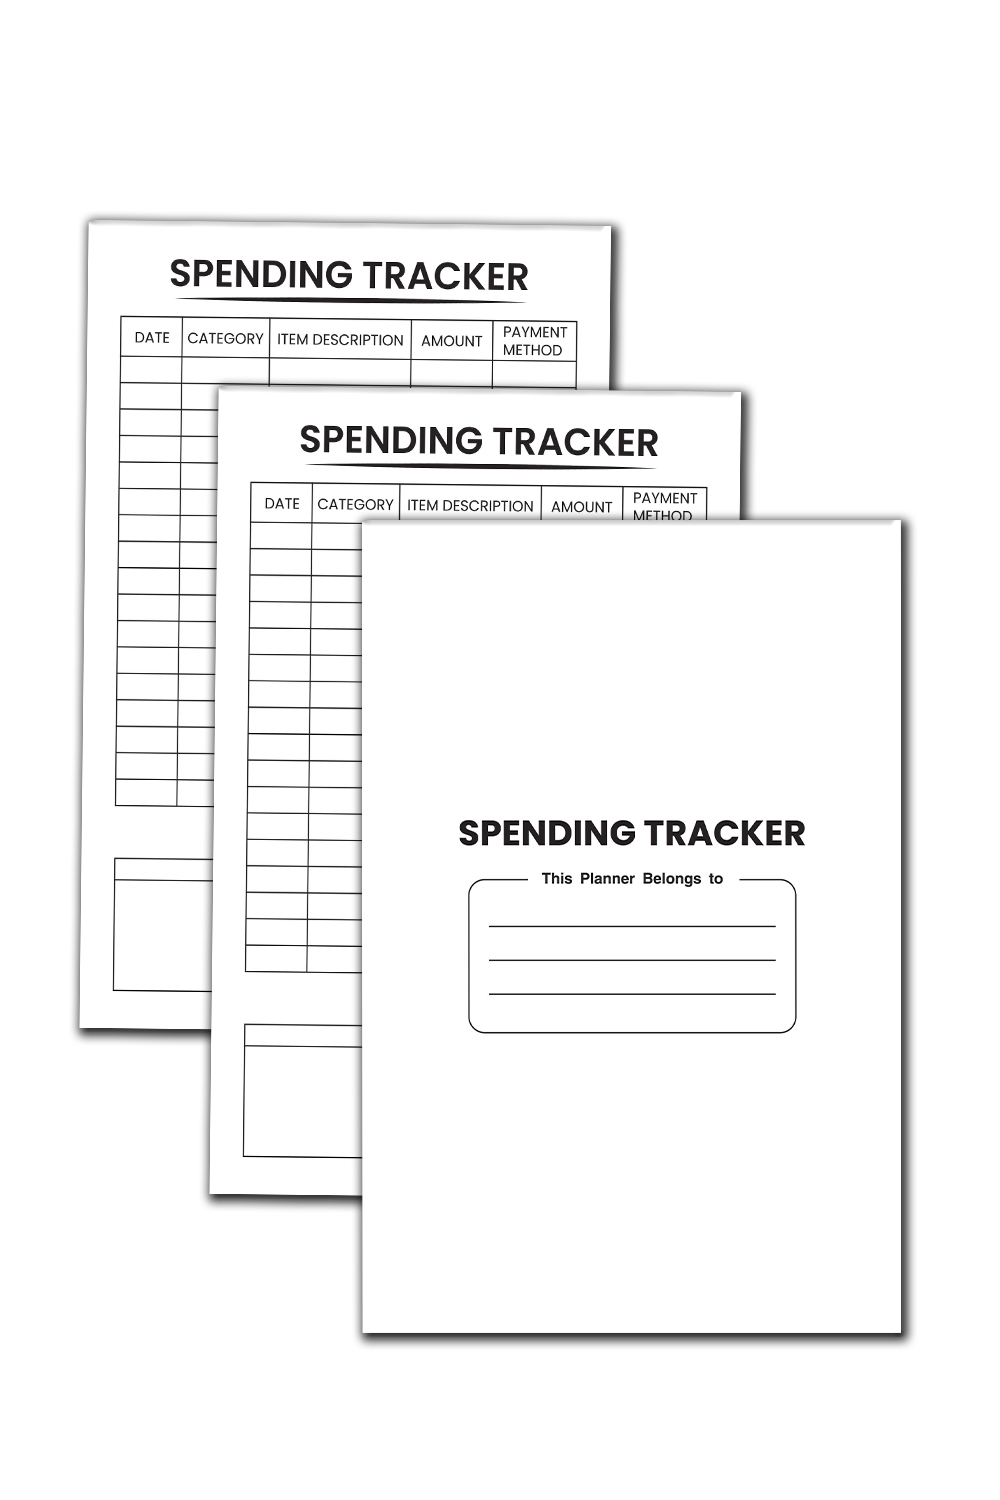 Image with blank unique pages and spending tracker cover